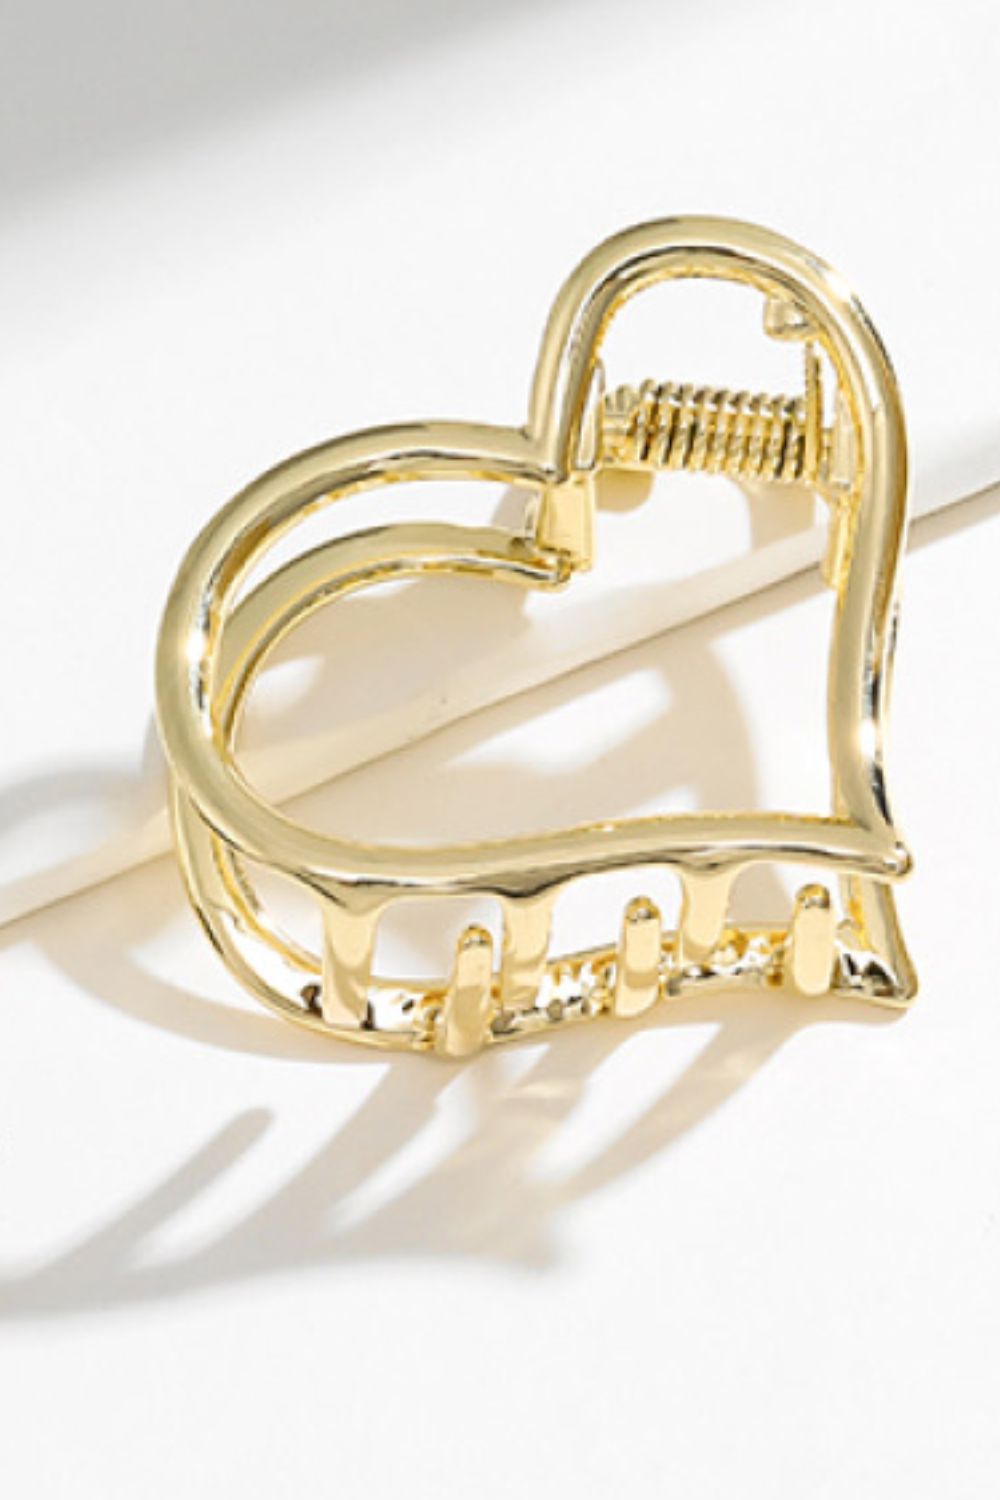 Another angle view of gold plated heart-shape claw clip